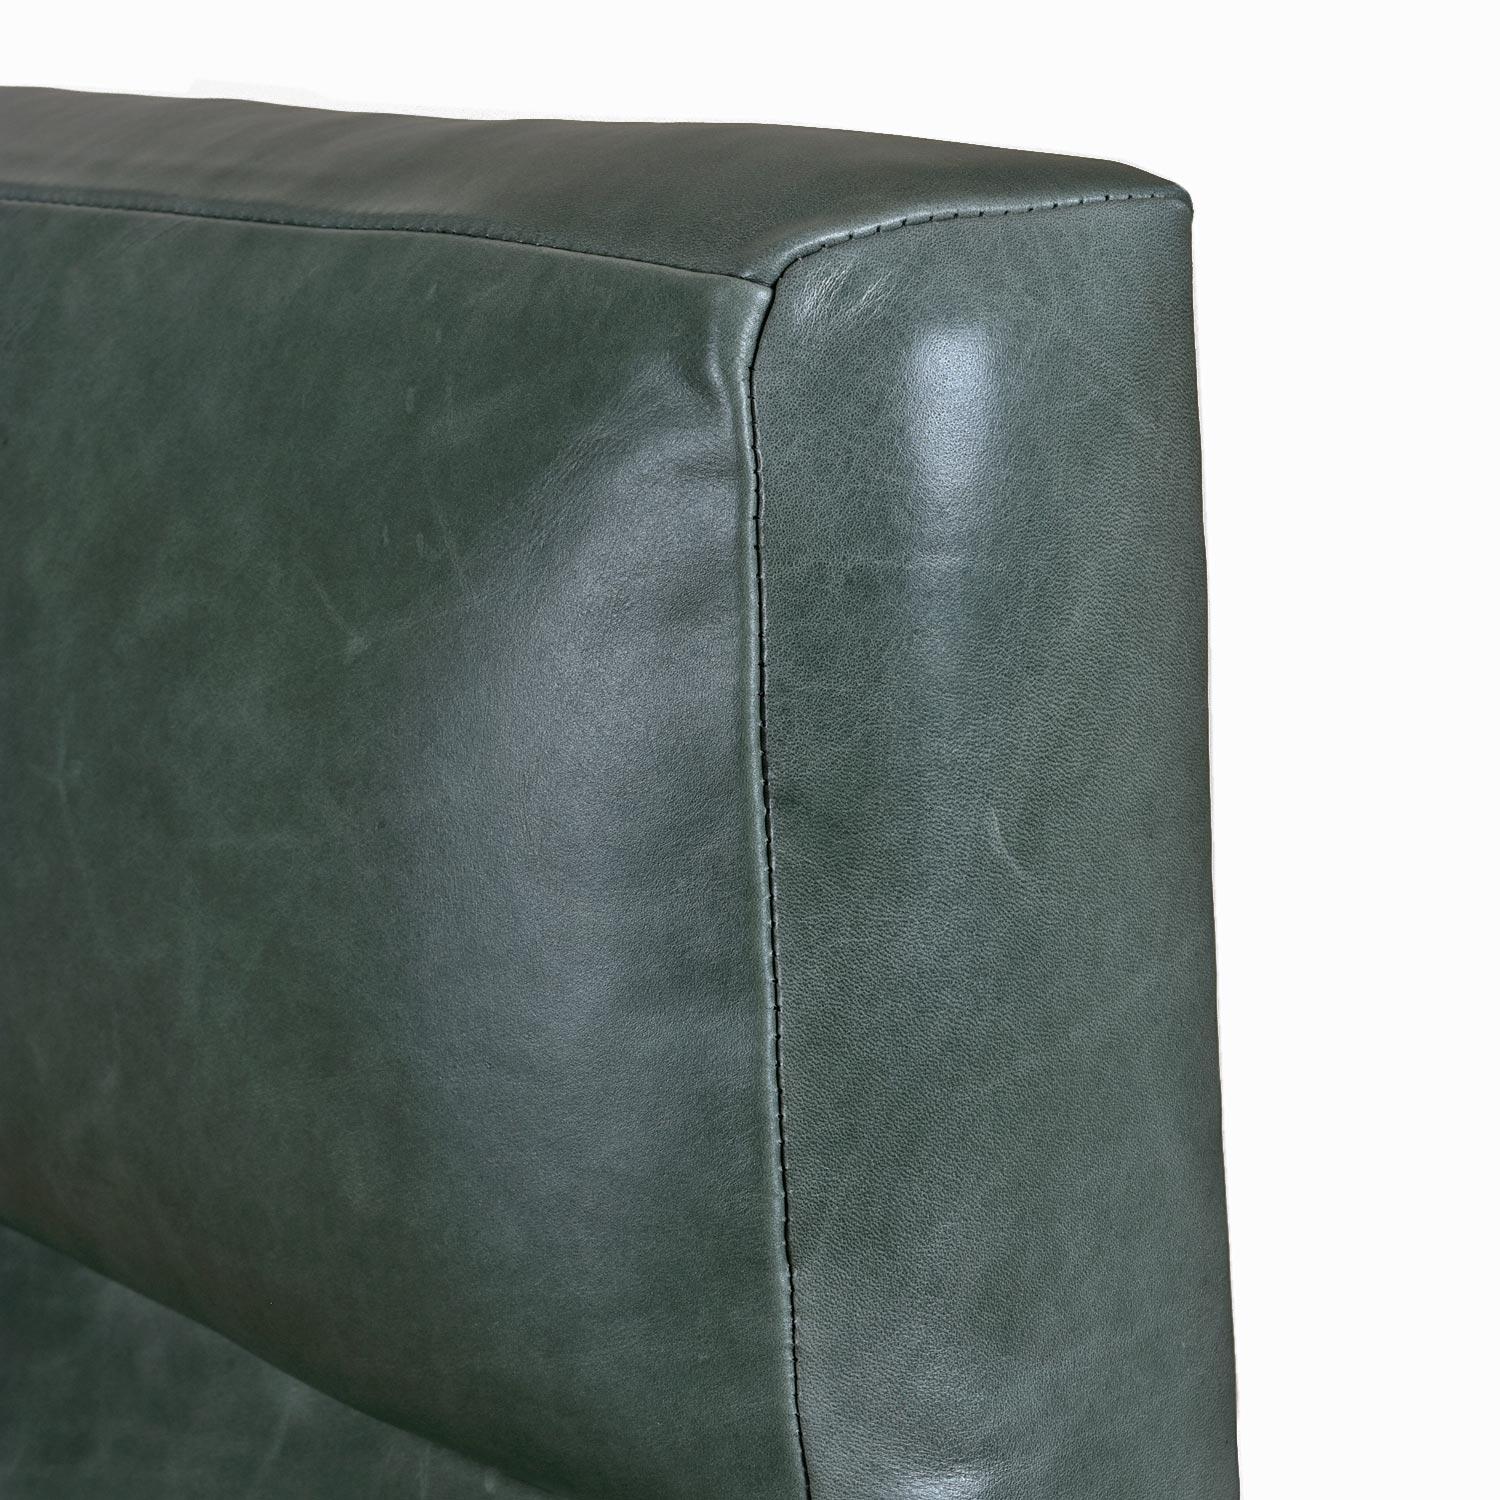 Highback Green Leather Ib Kofod-Larsen Sculpted Blade Arm Lounge Chair for Selig 1